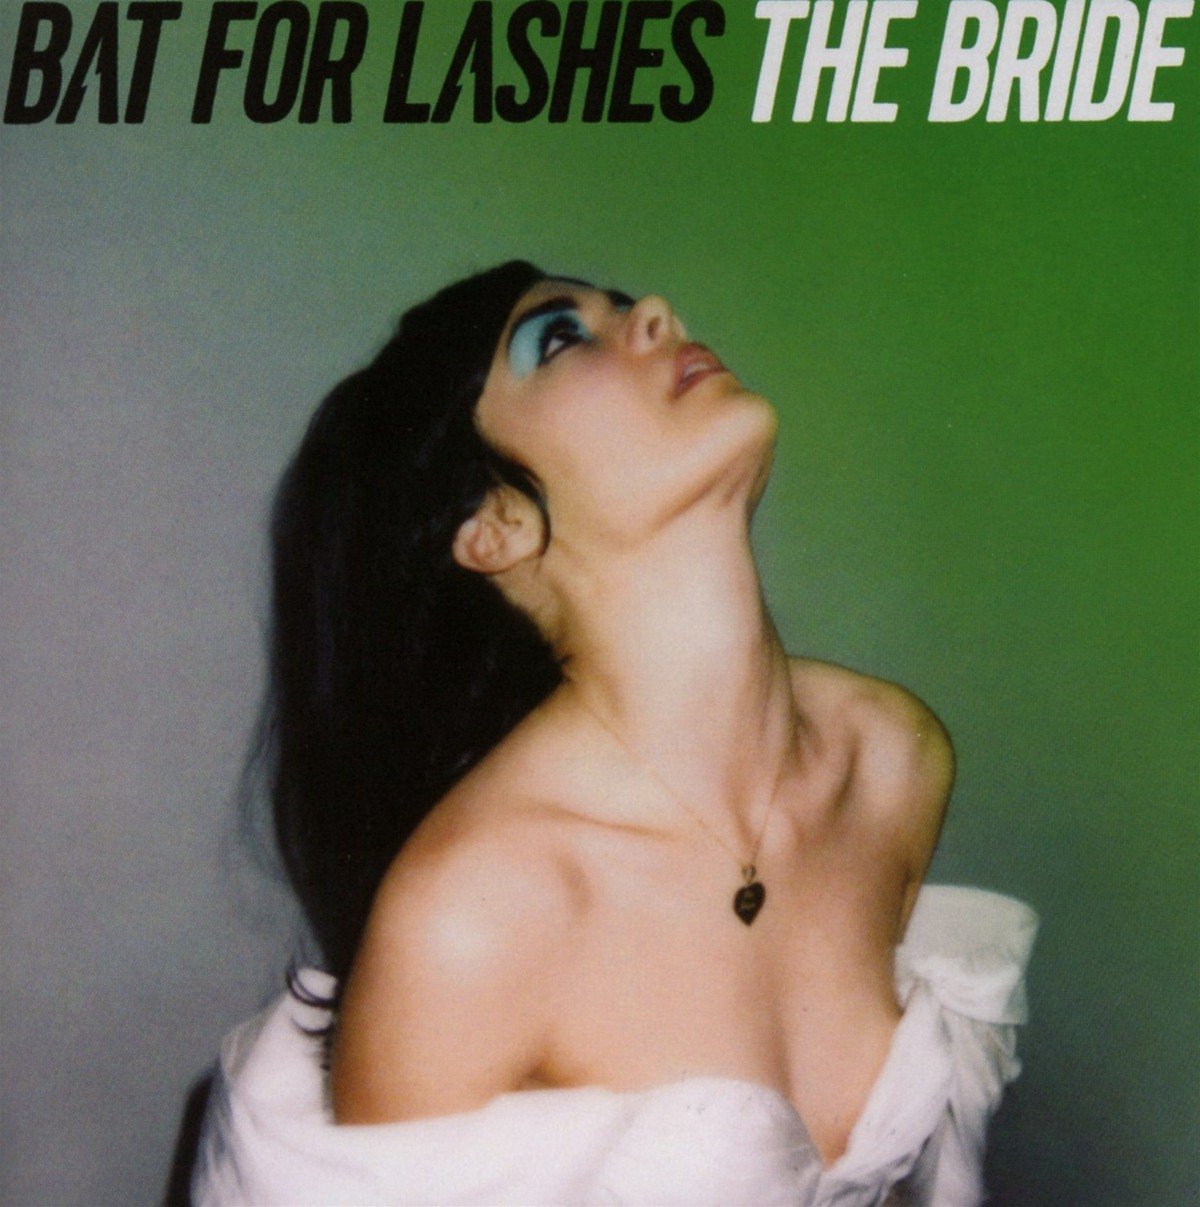 Bat For Lashes - The bride